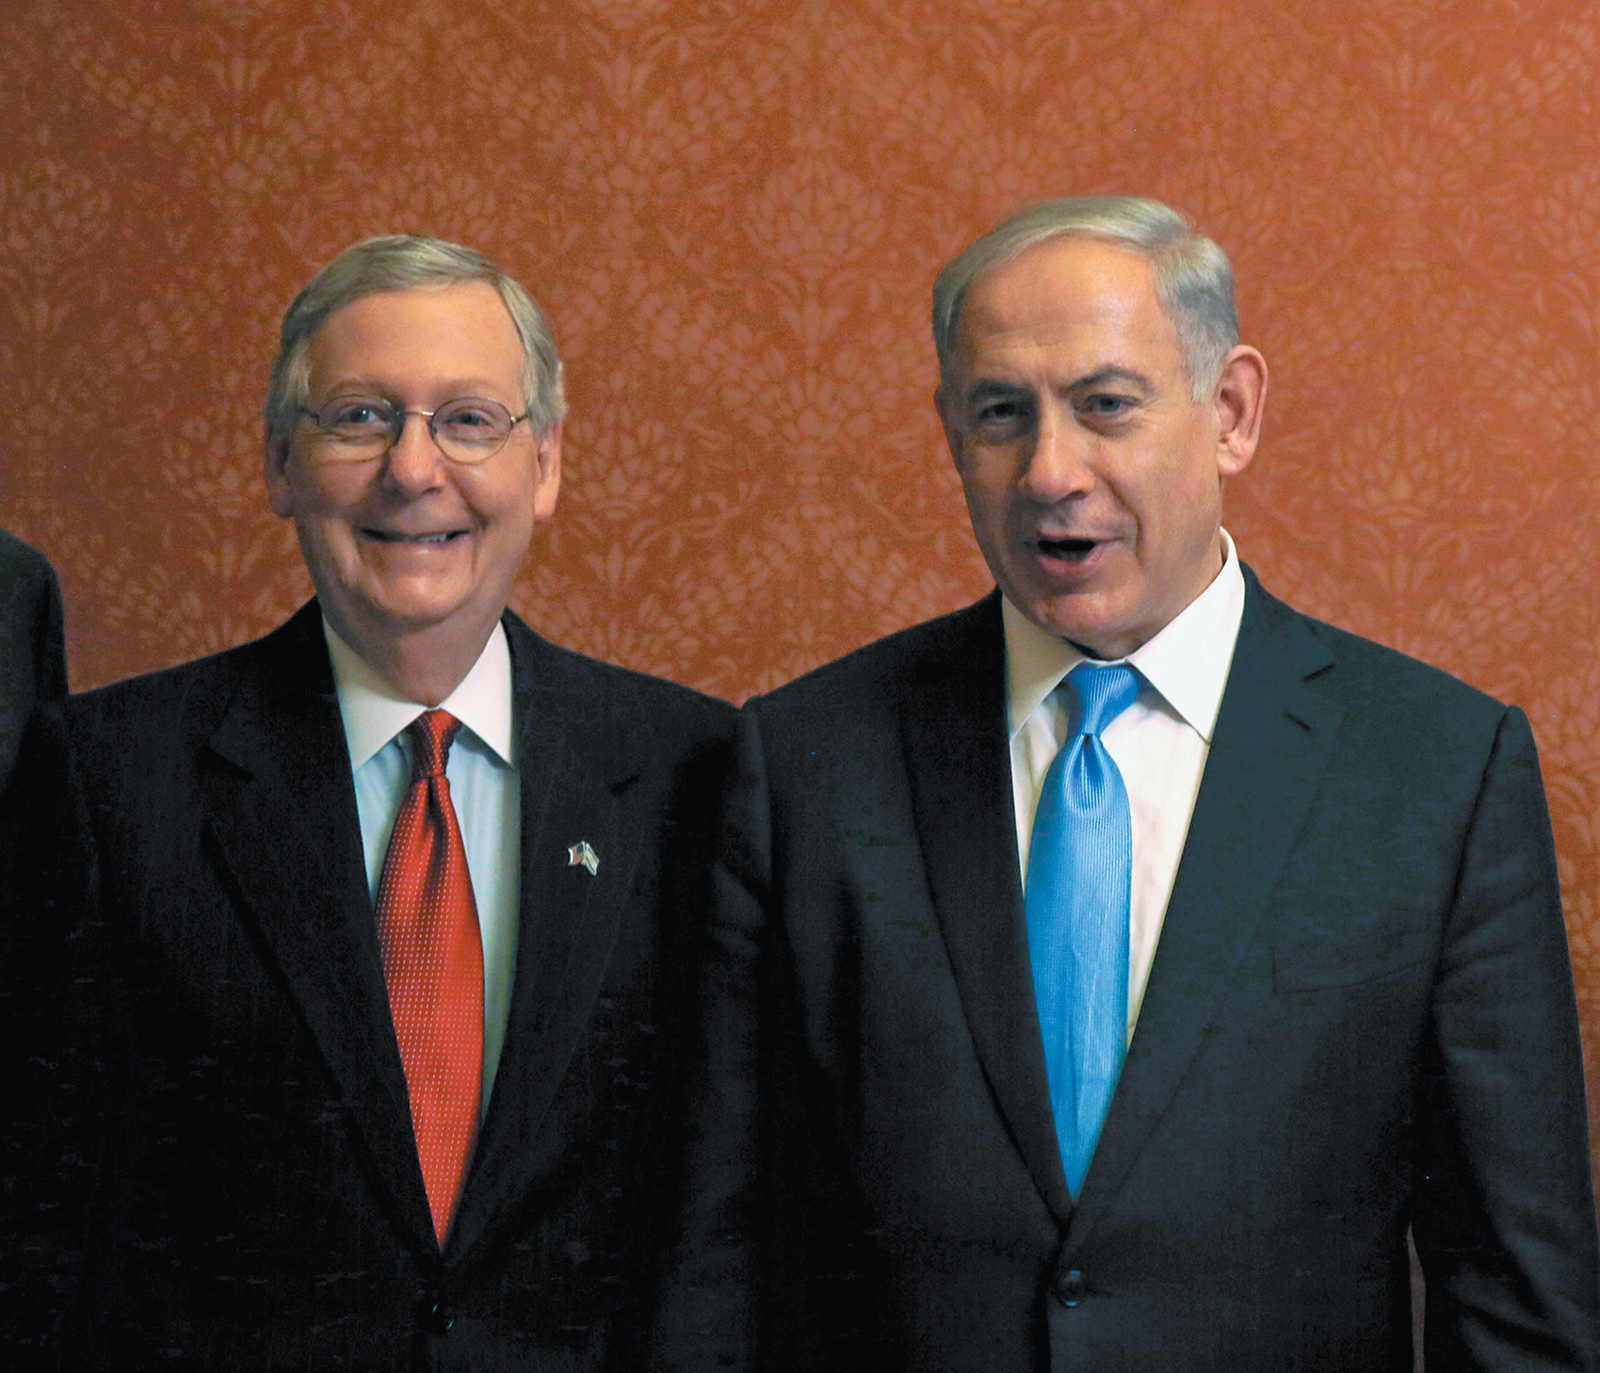 Senate Majority Leader Mitch McConnell and Israeli Prime Minister Benjamin Netanyahu during Netanyahu’s visit to Washington, D.C., to speak against President Obama’s policy on Iran’s nuclear program before a joint session of Congress, March 2015